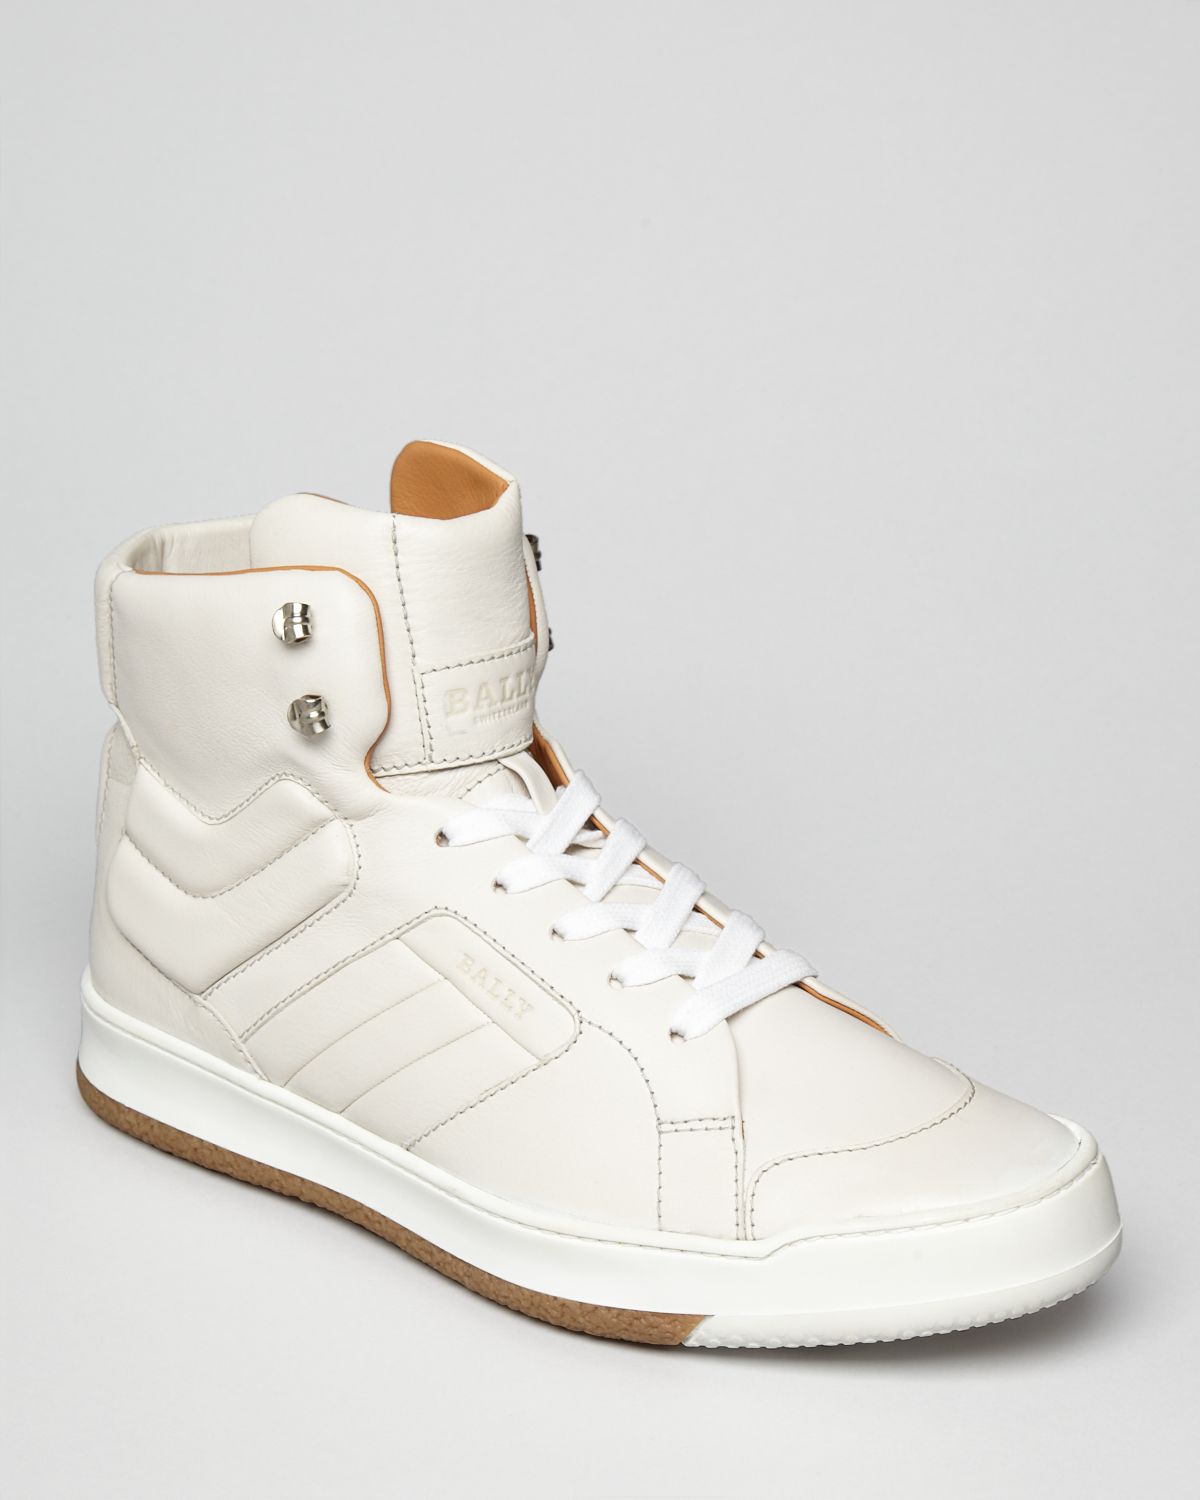 bally high top sneakers,Quality assurance,protein-burger.com